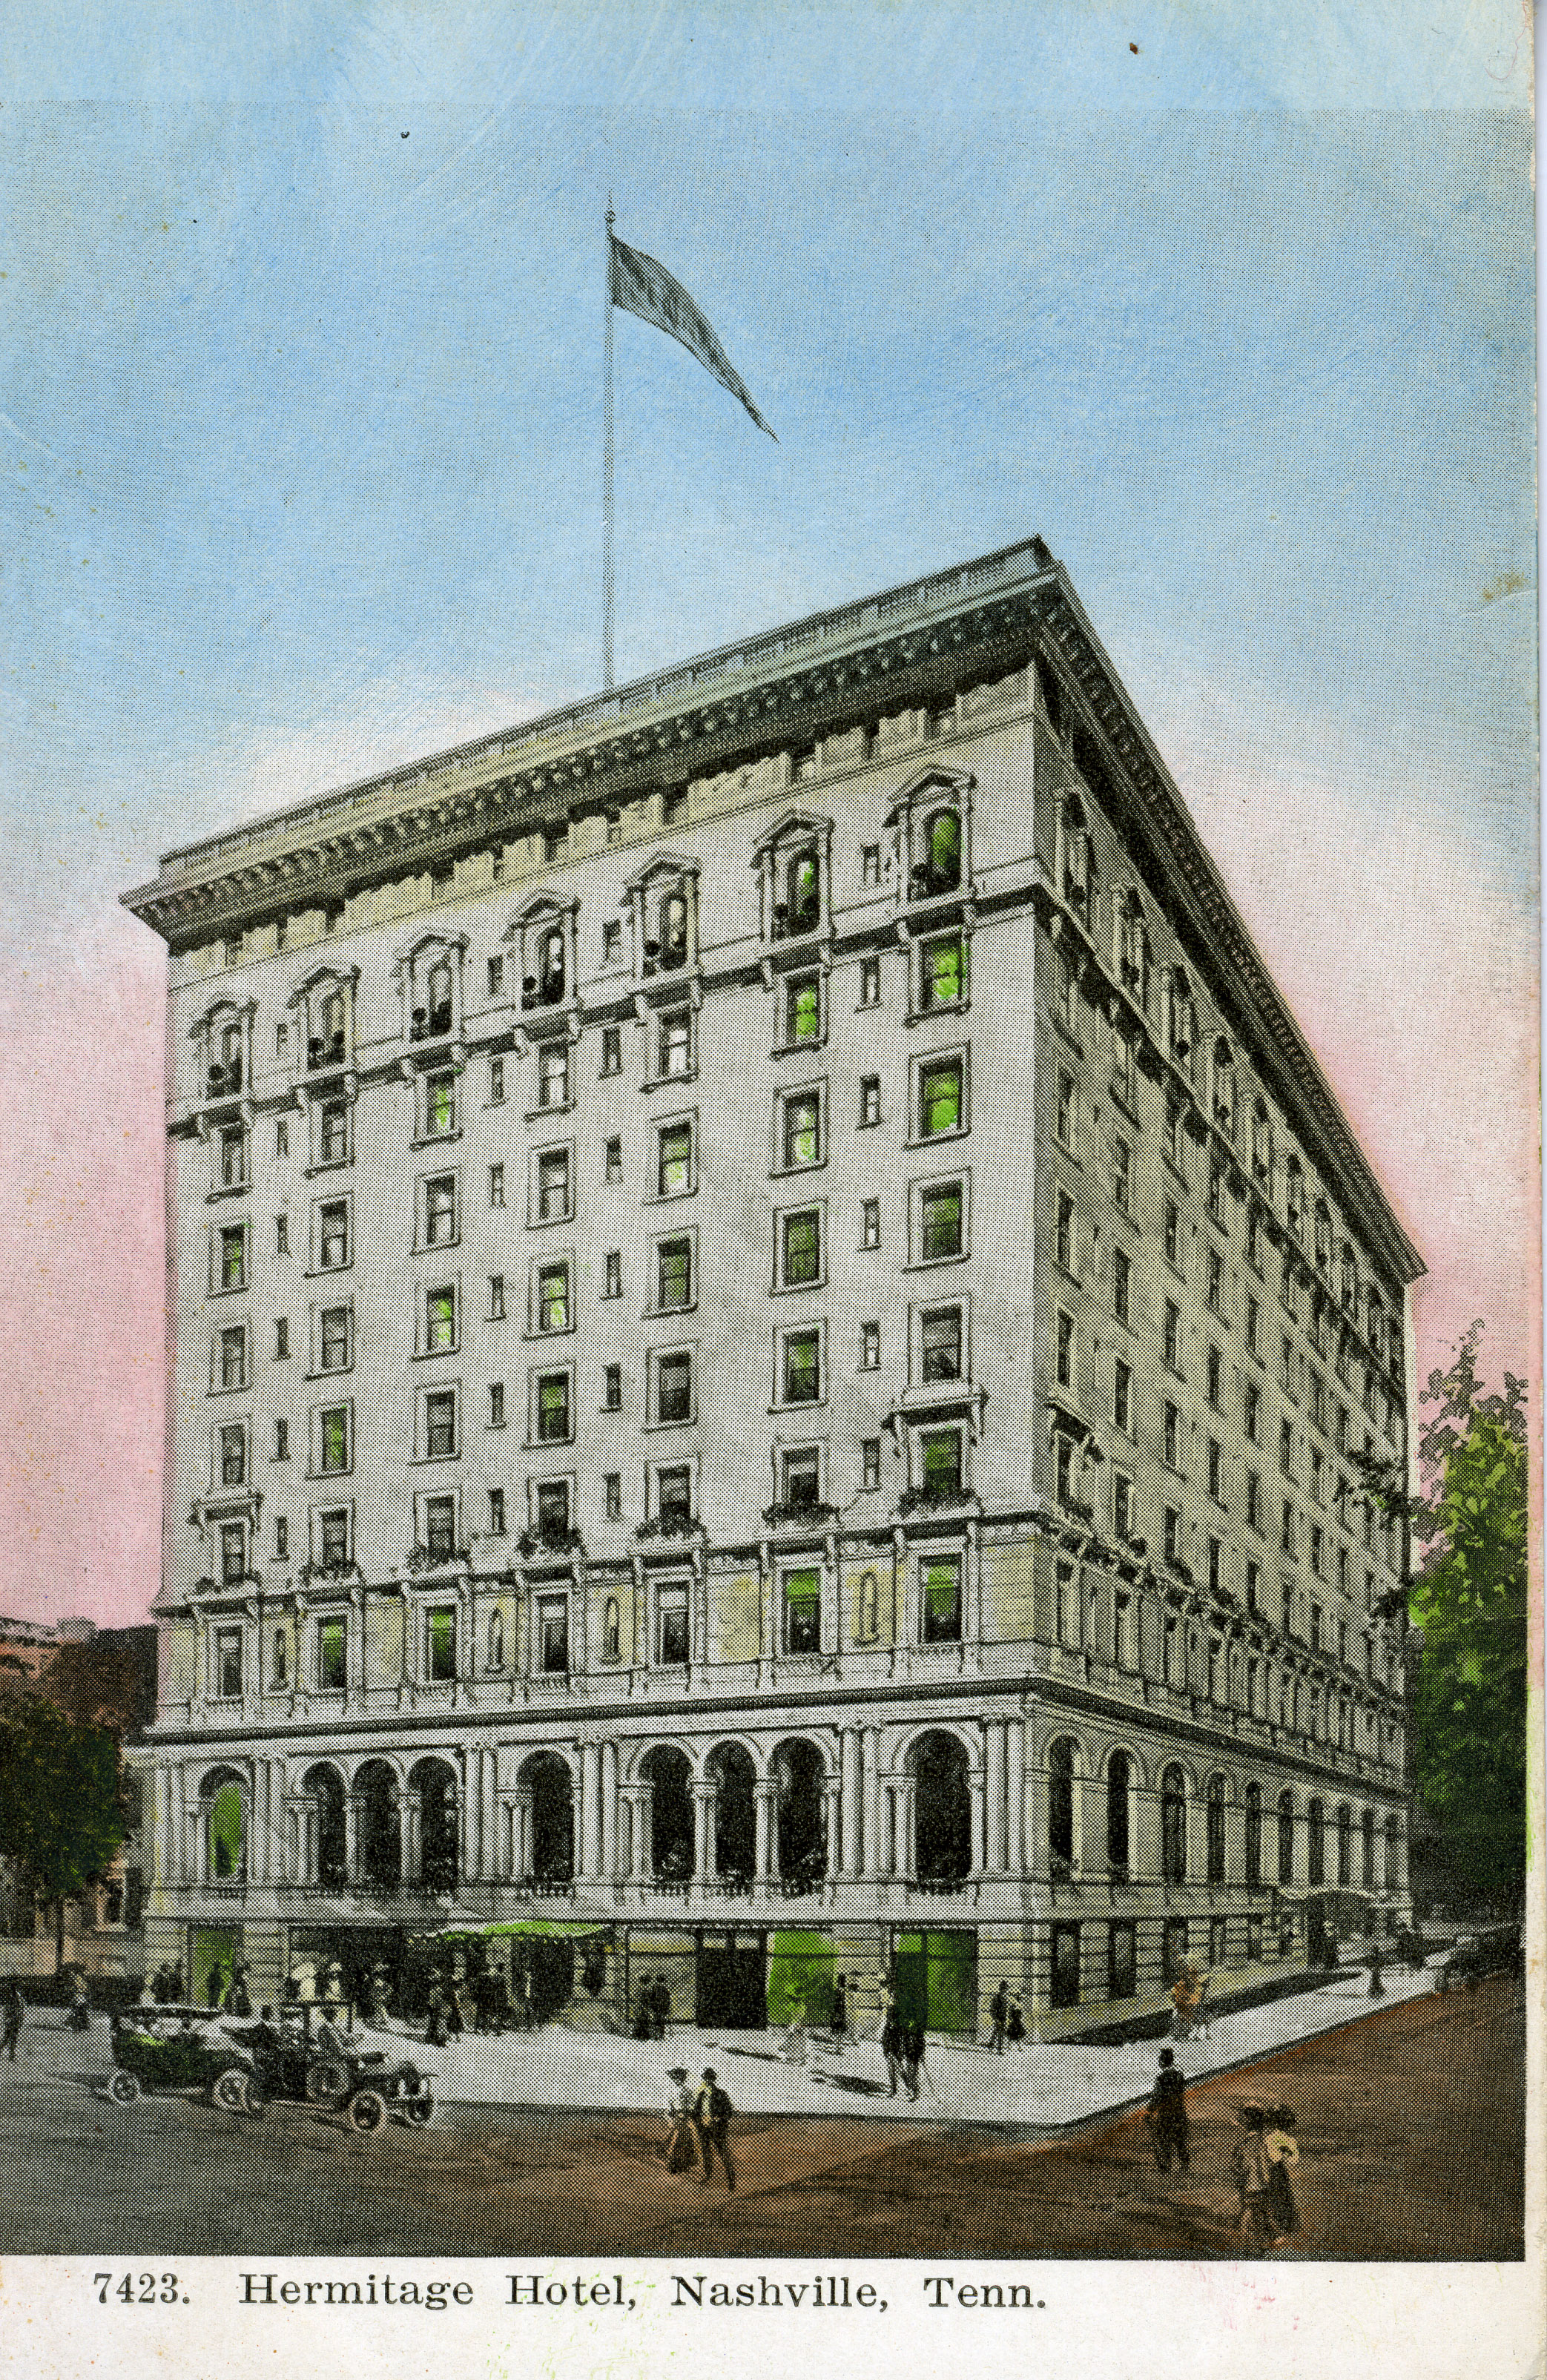 A painted depiction of a tall, white building with many windows and horse-drawn carriages in front. Text on the bottom of the image says "7423 Hermitage Hotel, Nashville, Tennessee"